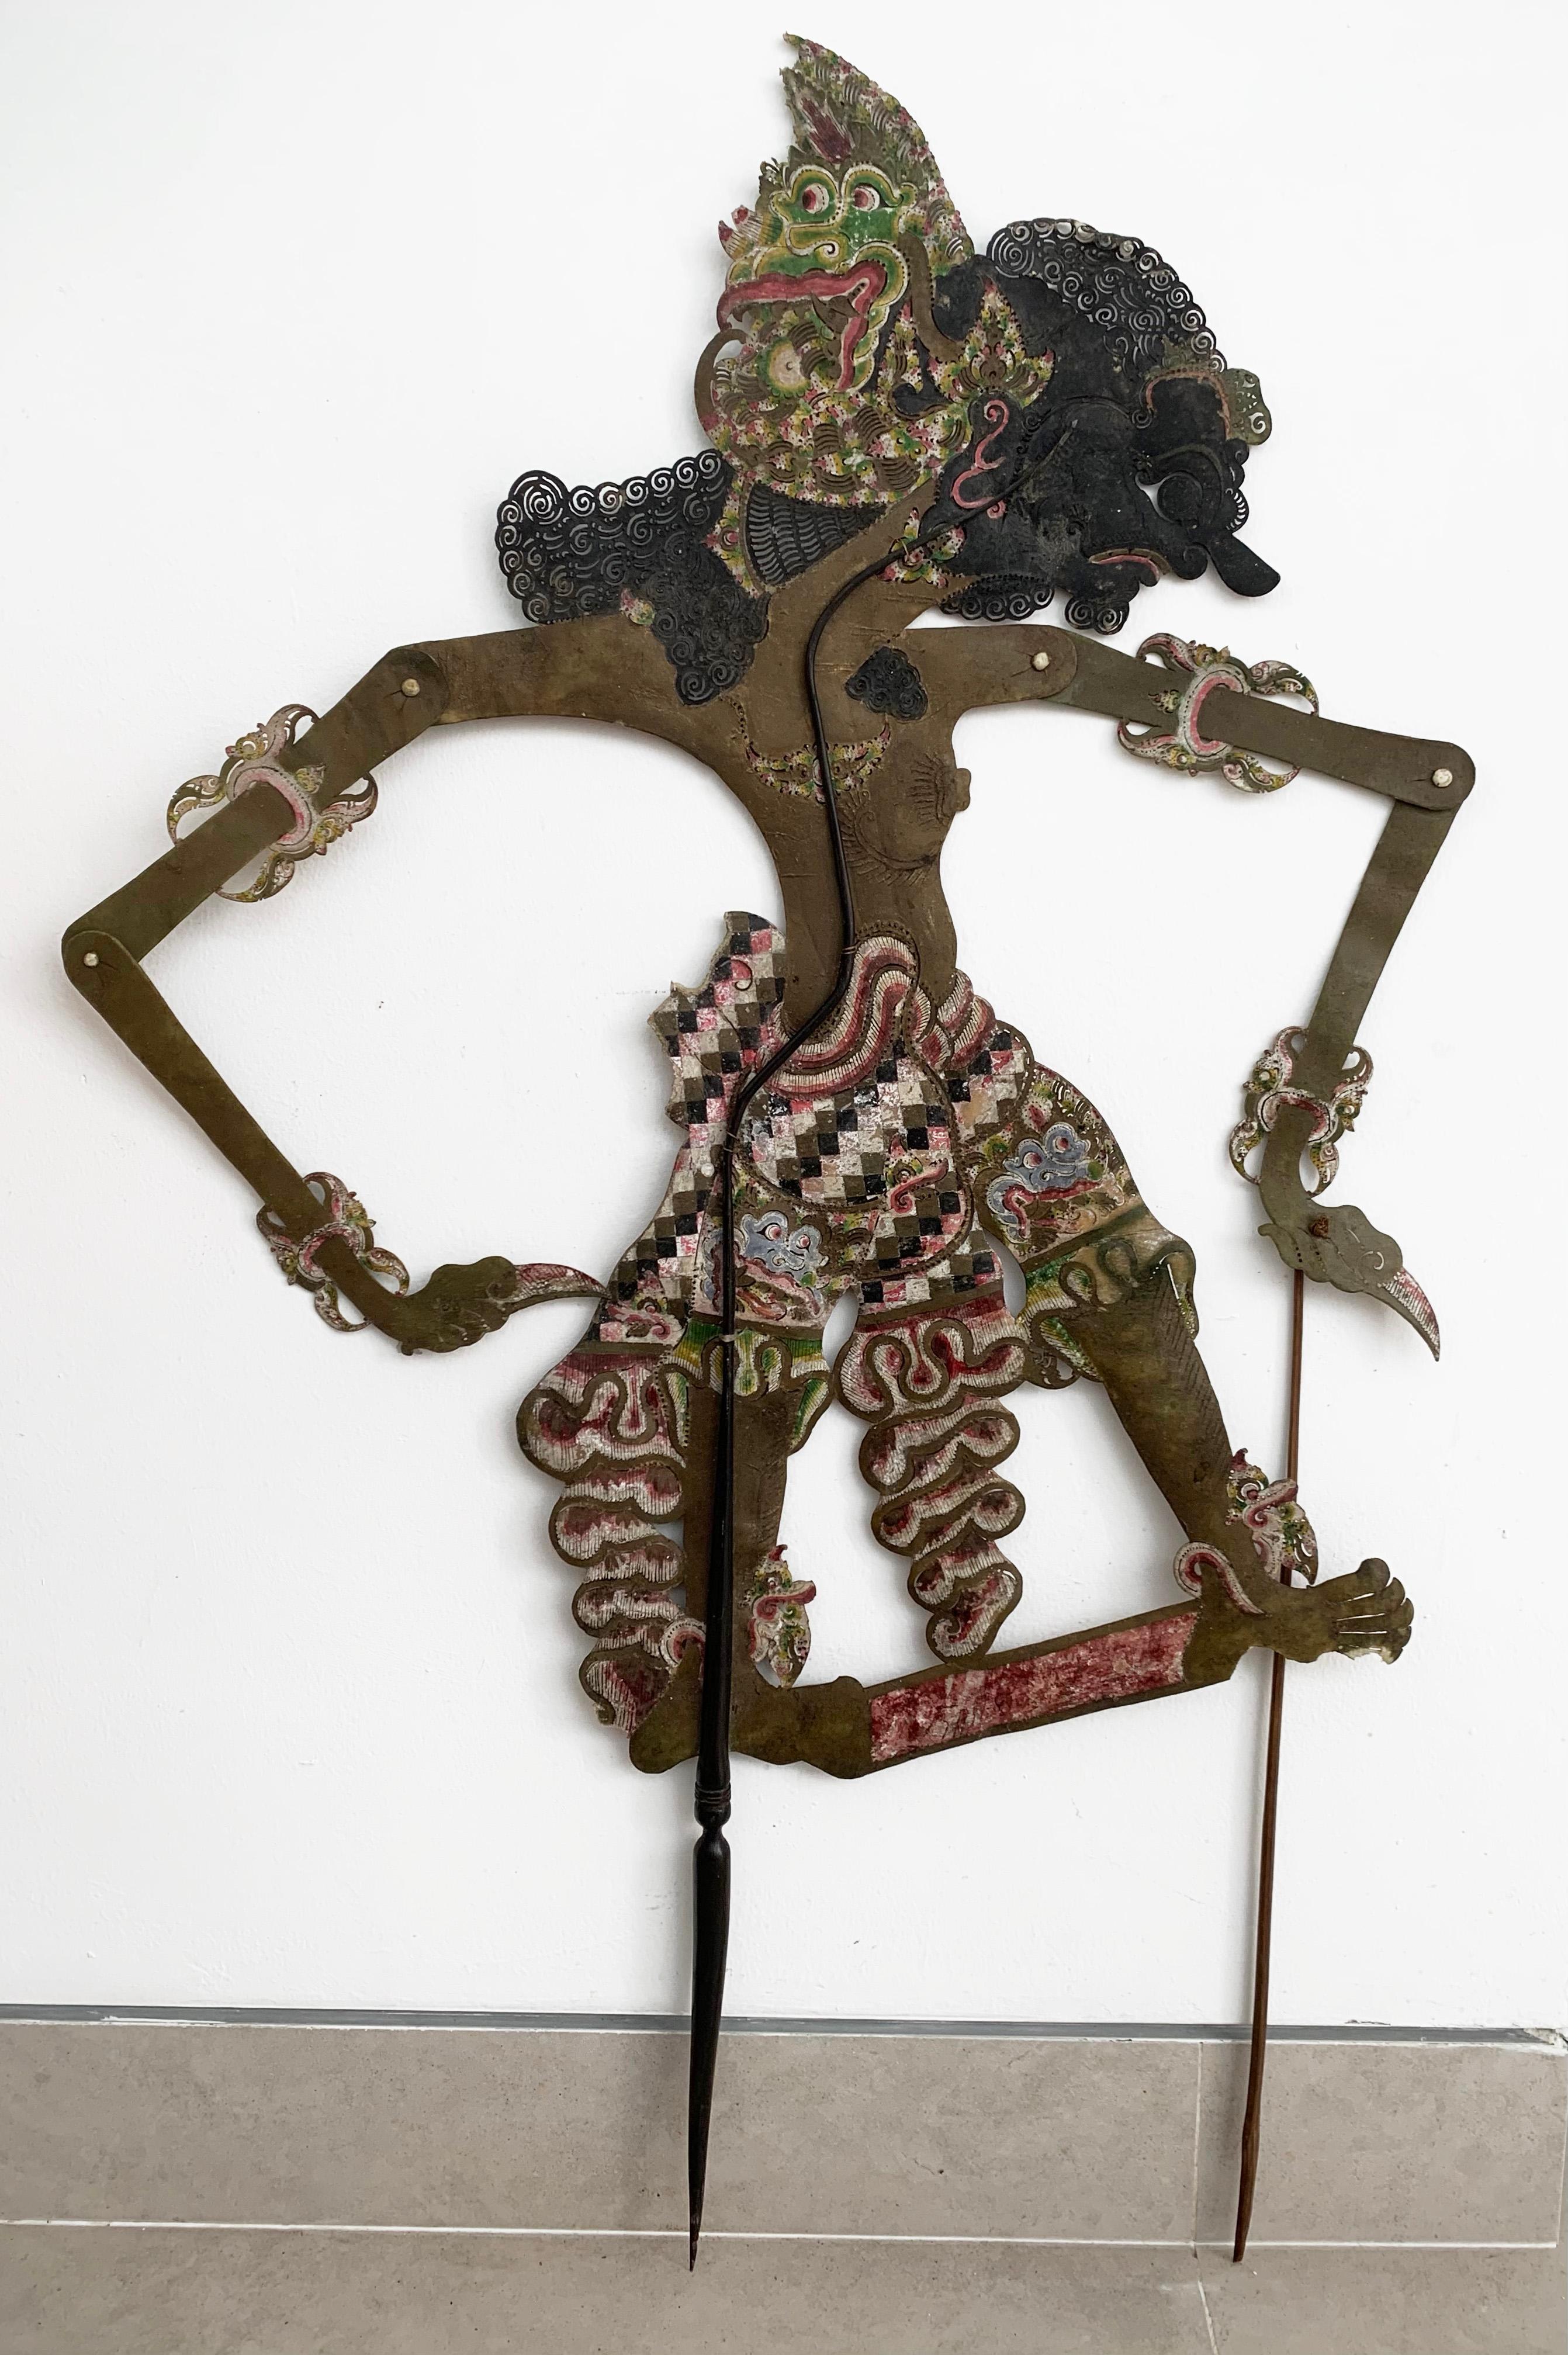 This flat shadow puppet was crafted on the island of Java by a puppet artist using buffalo hide and mounted on bamboo sticks. It features movable arms, controlled by outer bamboo rods (however this puppet lost one of its bamboo rods over the years